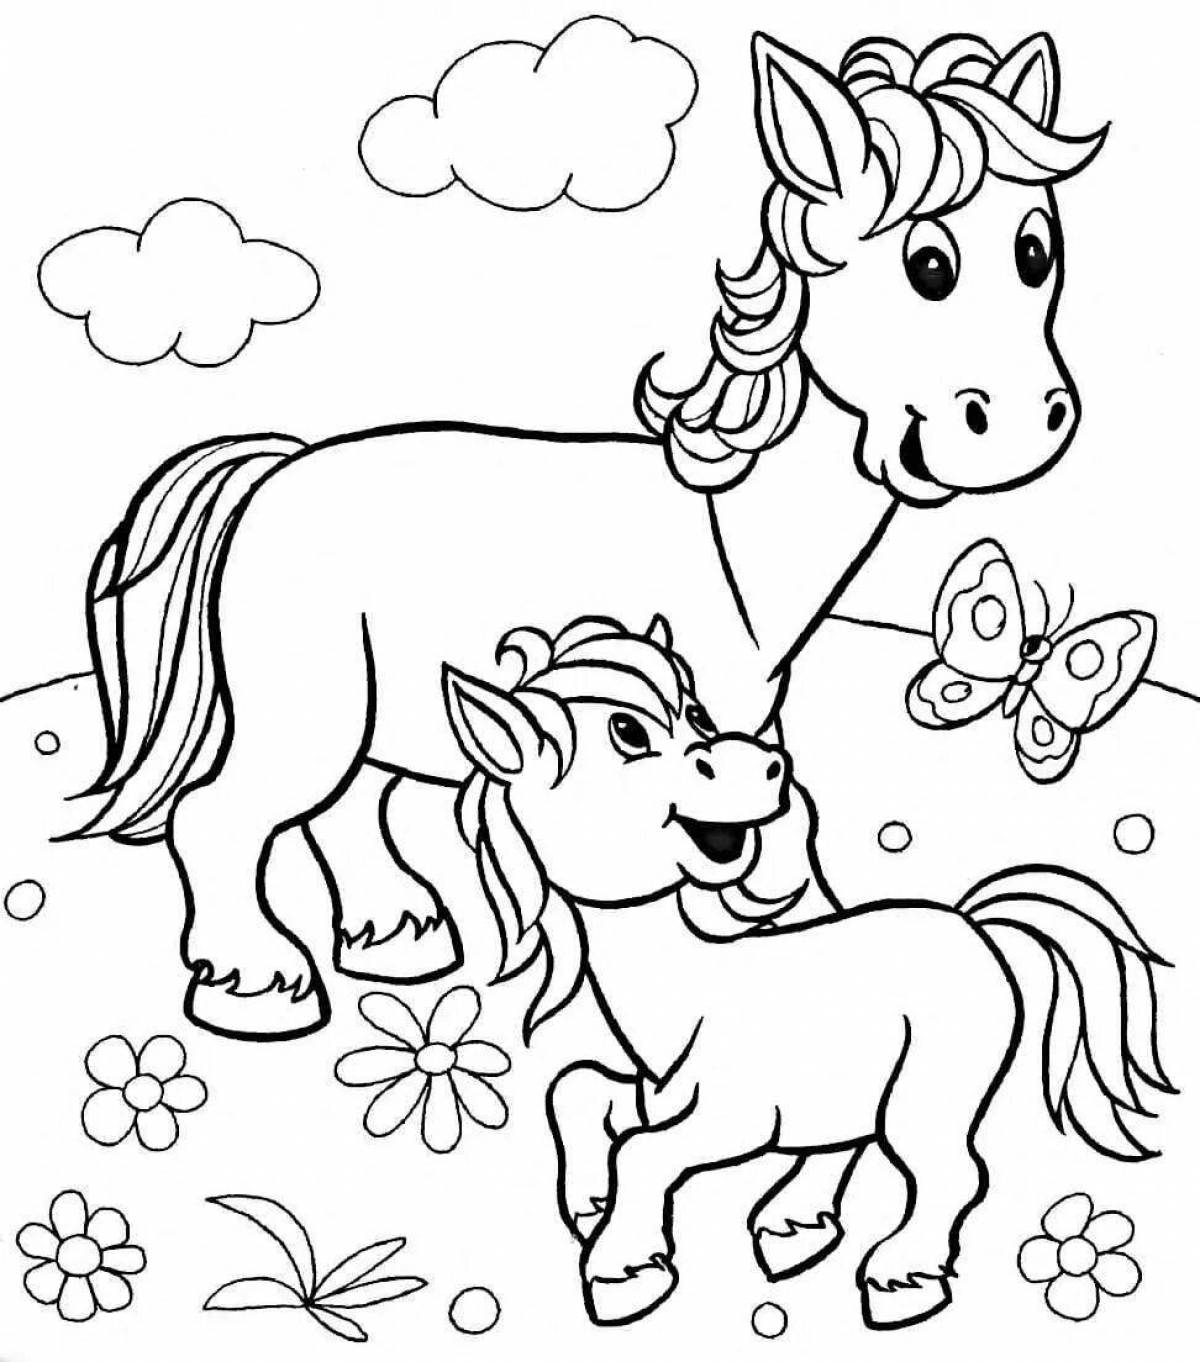 Lovely coloring book for preschool pets